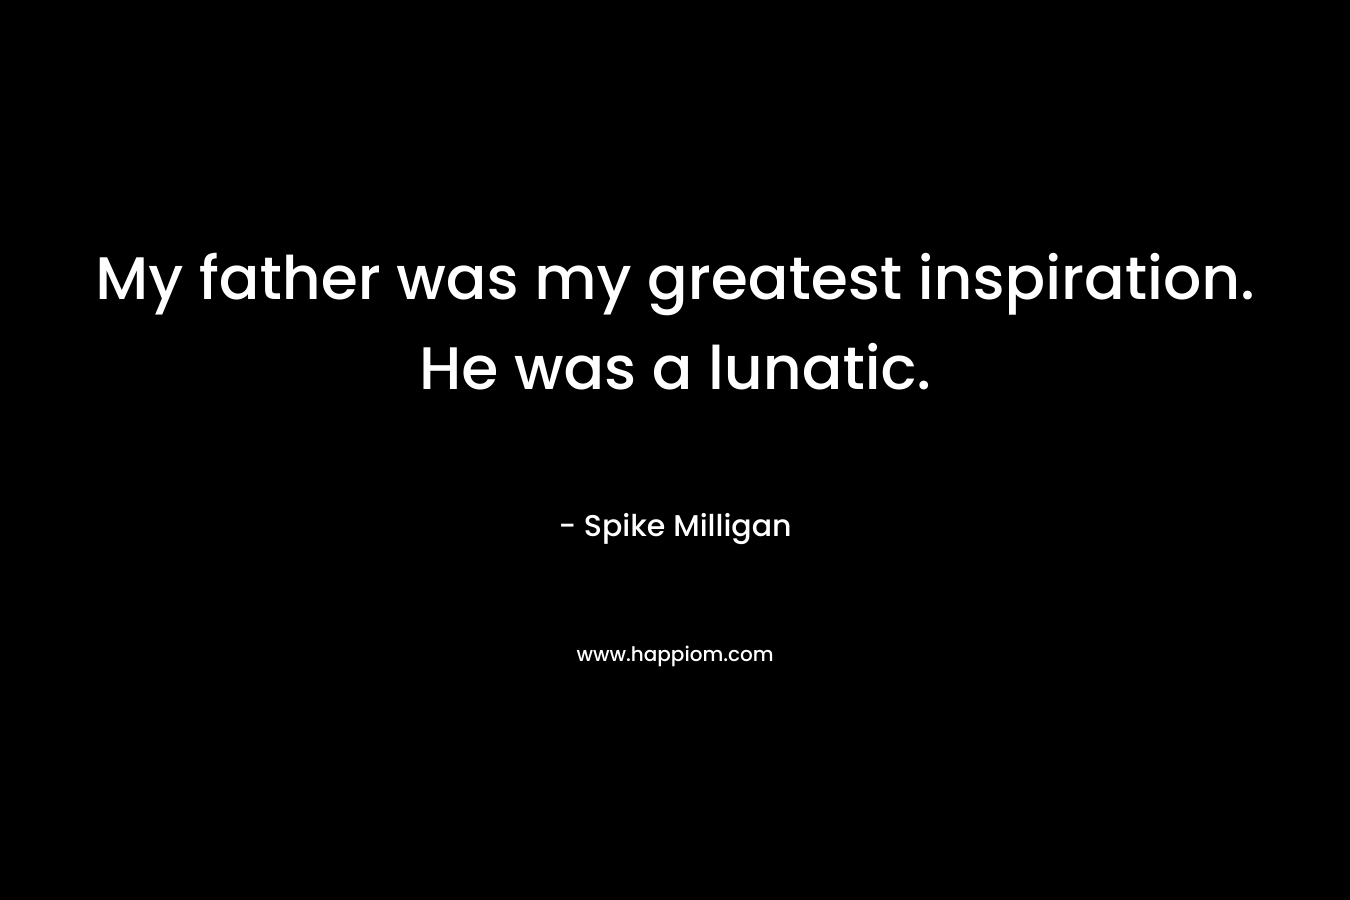 My father was my greatest inspiration. He was a lunatic. – Spike Milligan